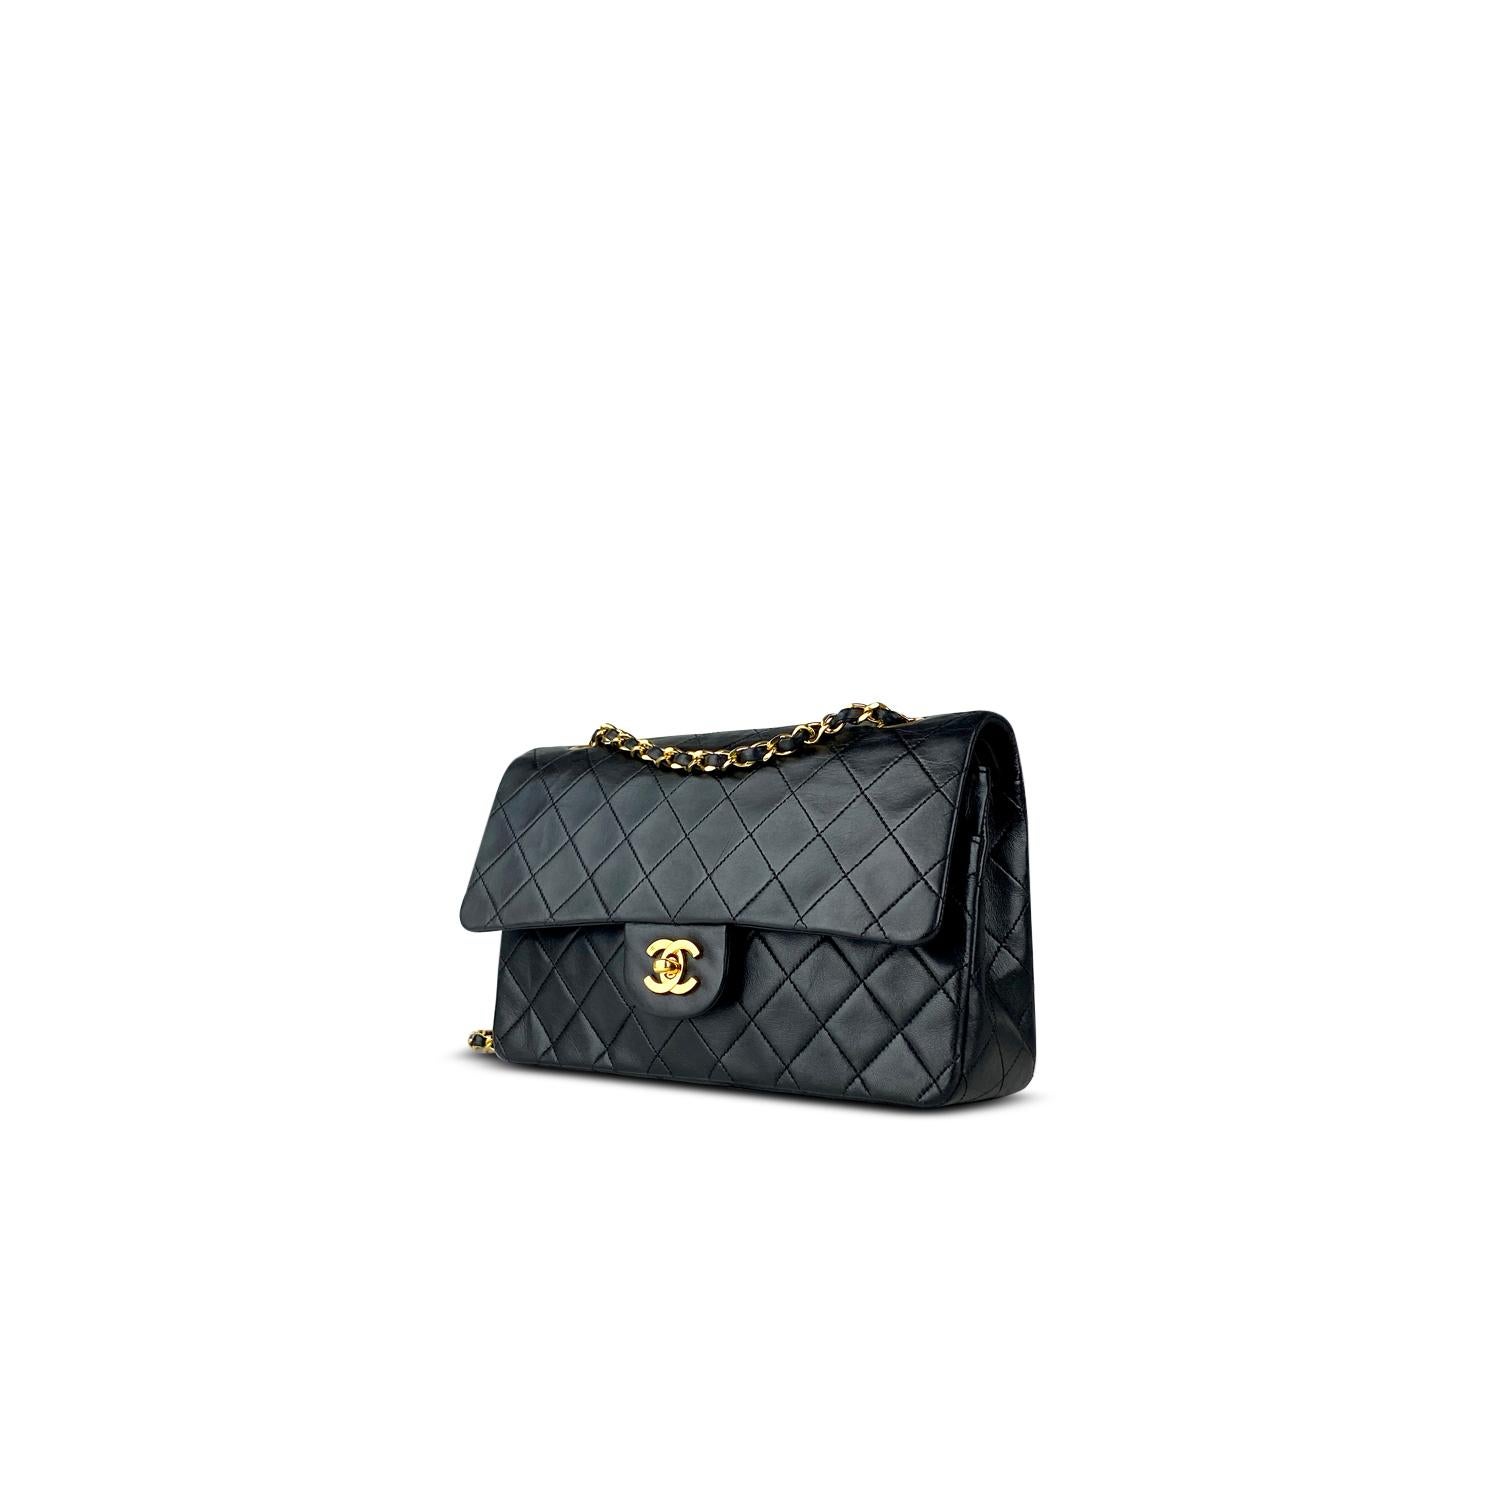 Black quilted lambskin Chanel Medium Classic/Timeless Double Flap bag with

– Gold-tone hardware
– Convertible chain-link and leather shoulder strap
– Burgundy leather lining
– Single patch pocket at back
– Single zip pocket at flap underside, three